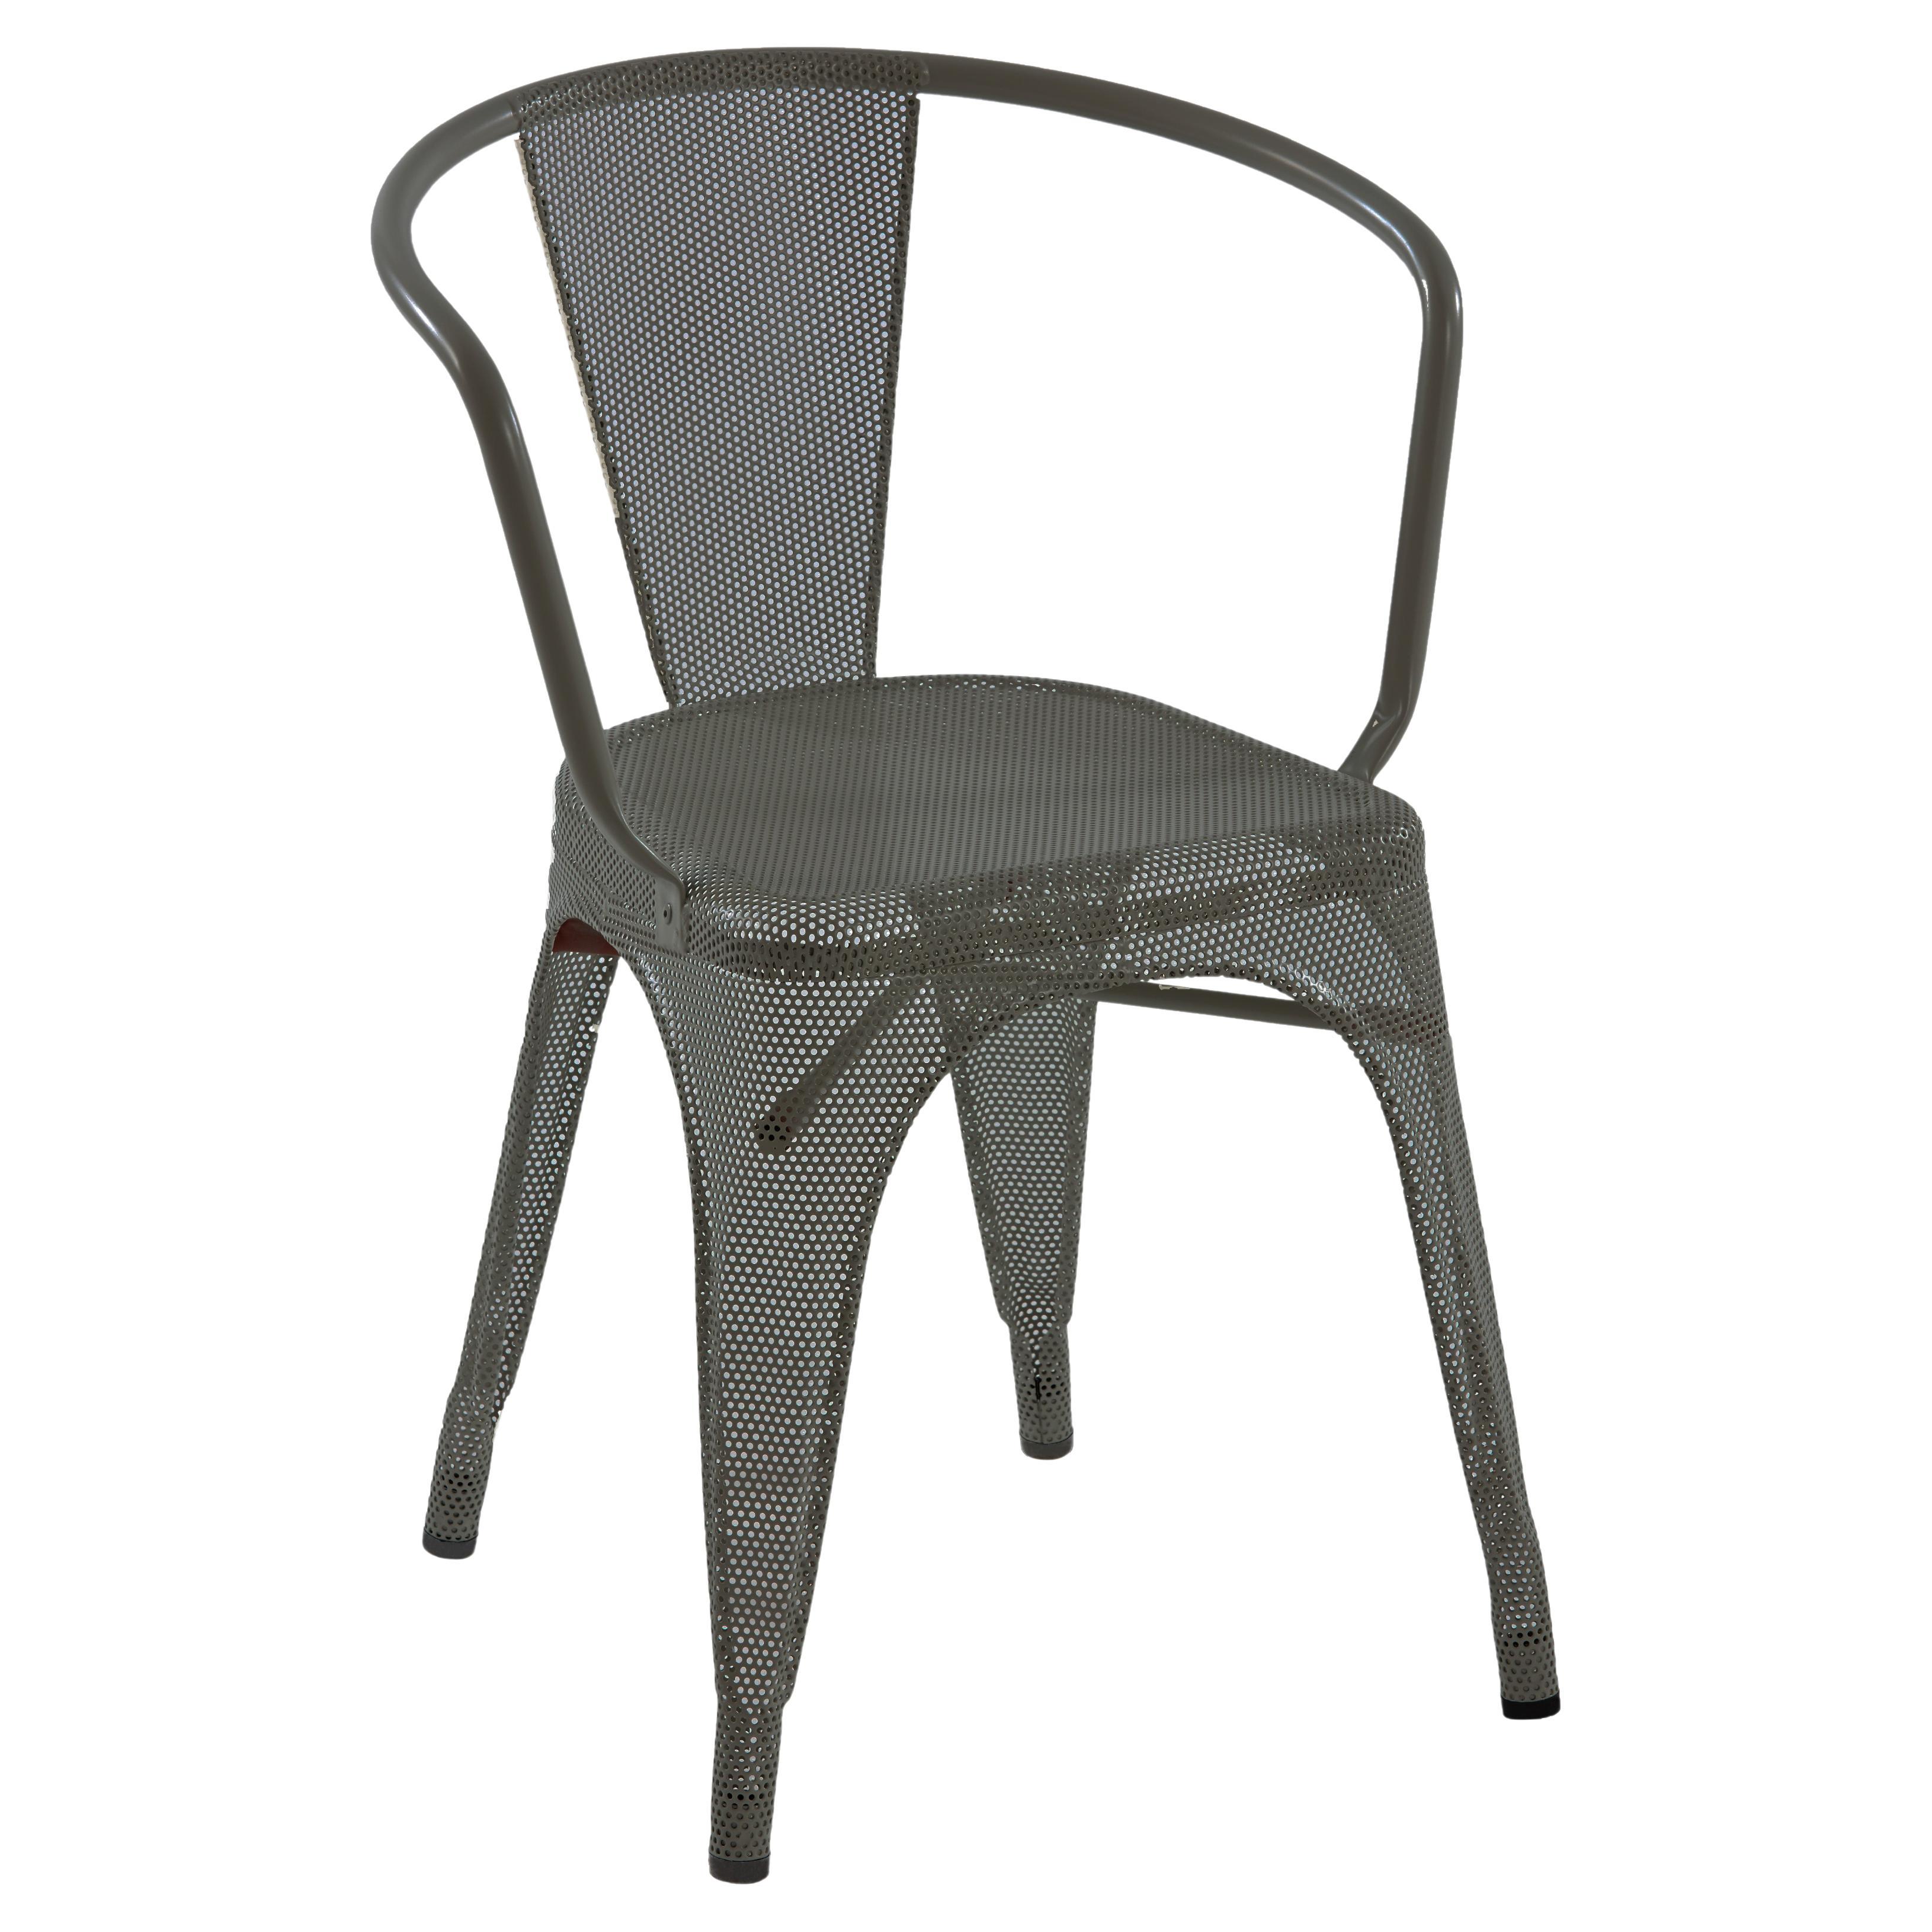 Tolix A56 Arm Chair Perforated Outdoor Painted in Graphite